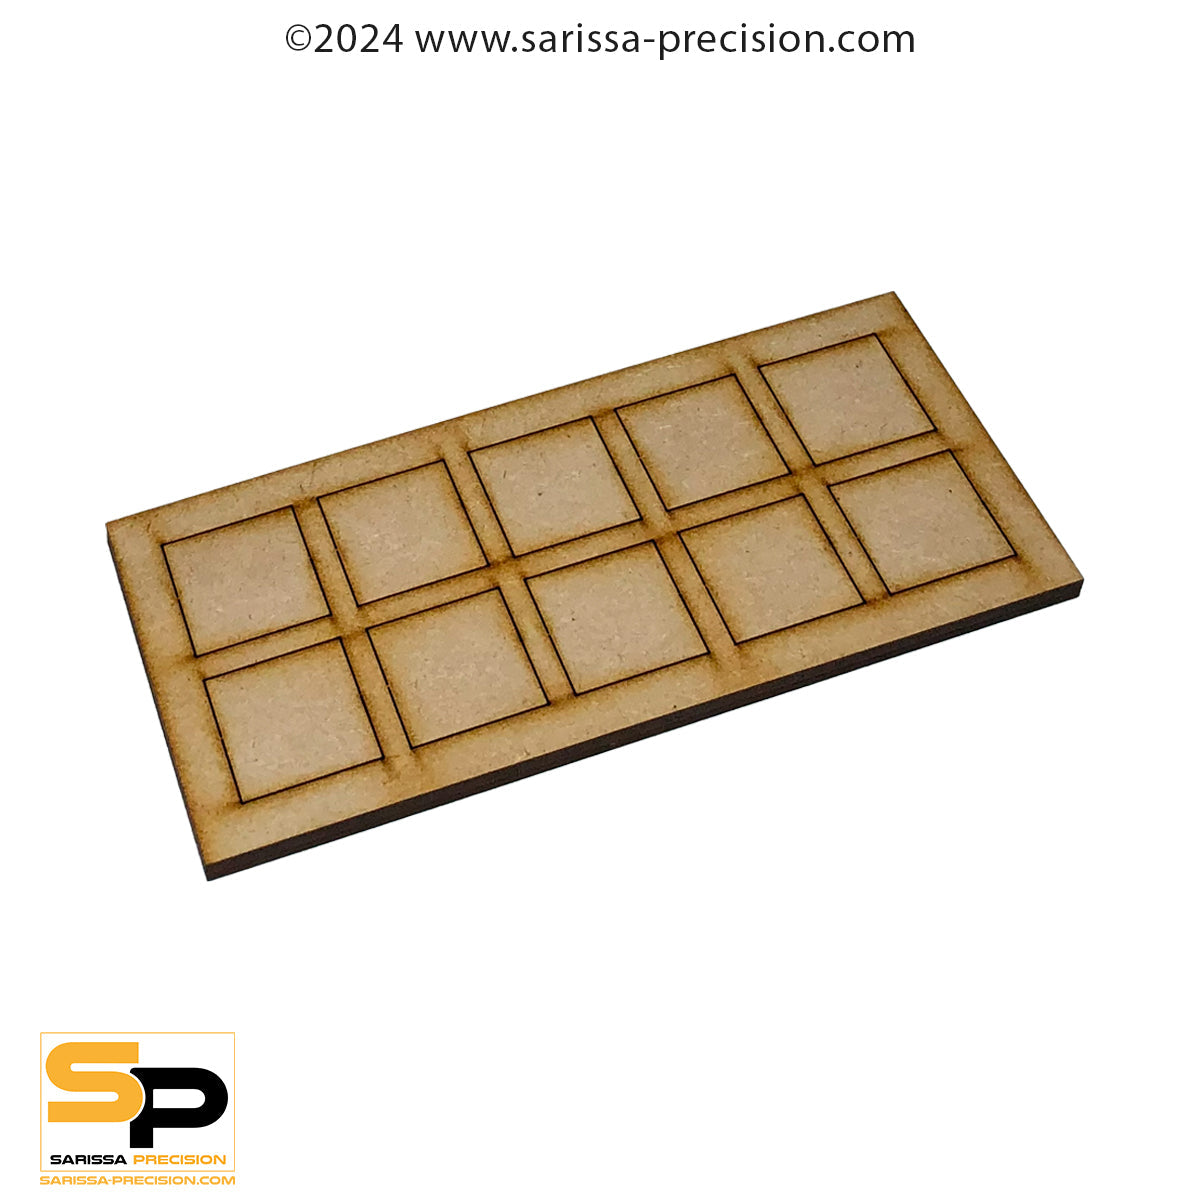 12 x 9 30x30mm Conversion Tray for 25x25mm bases